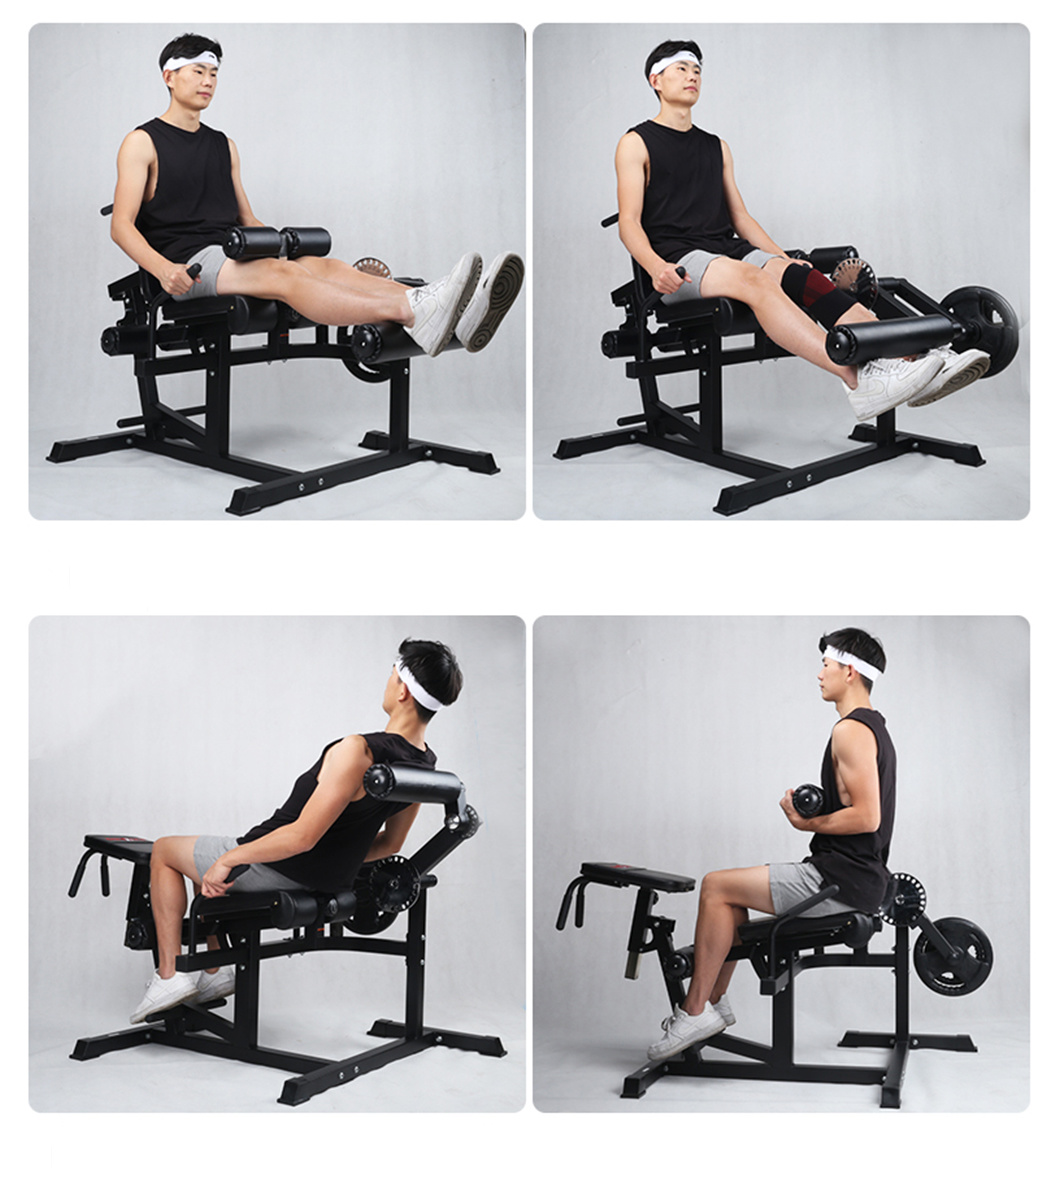 High Quality Commercial or Home Fitness Equipment Versatile Leg Trainer